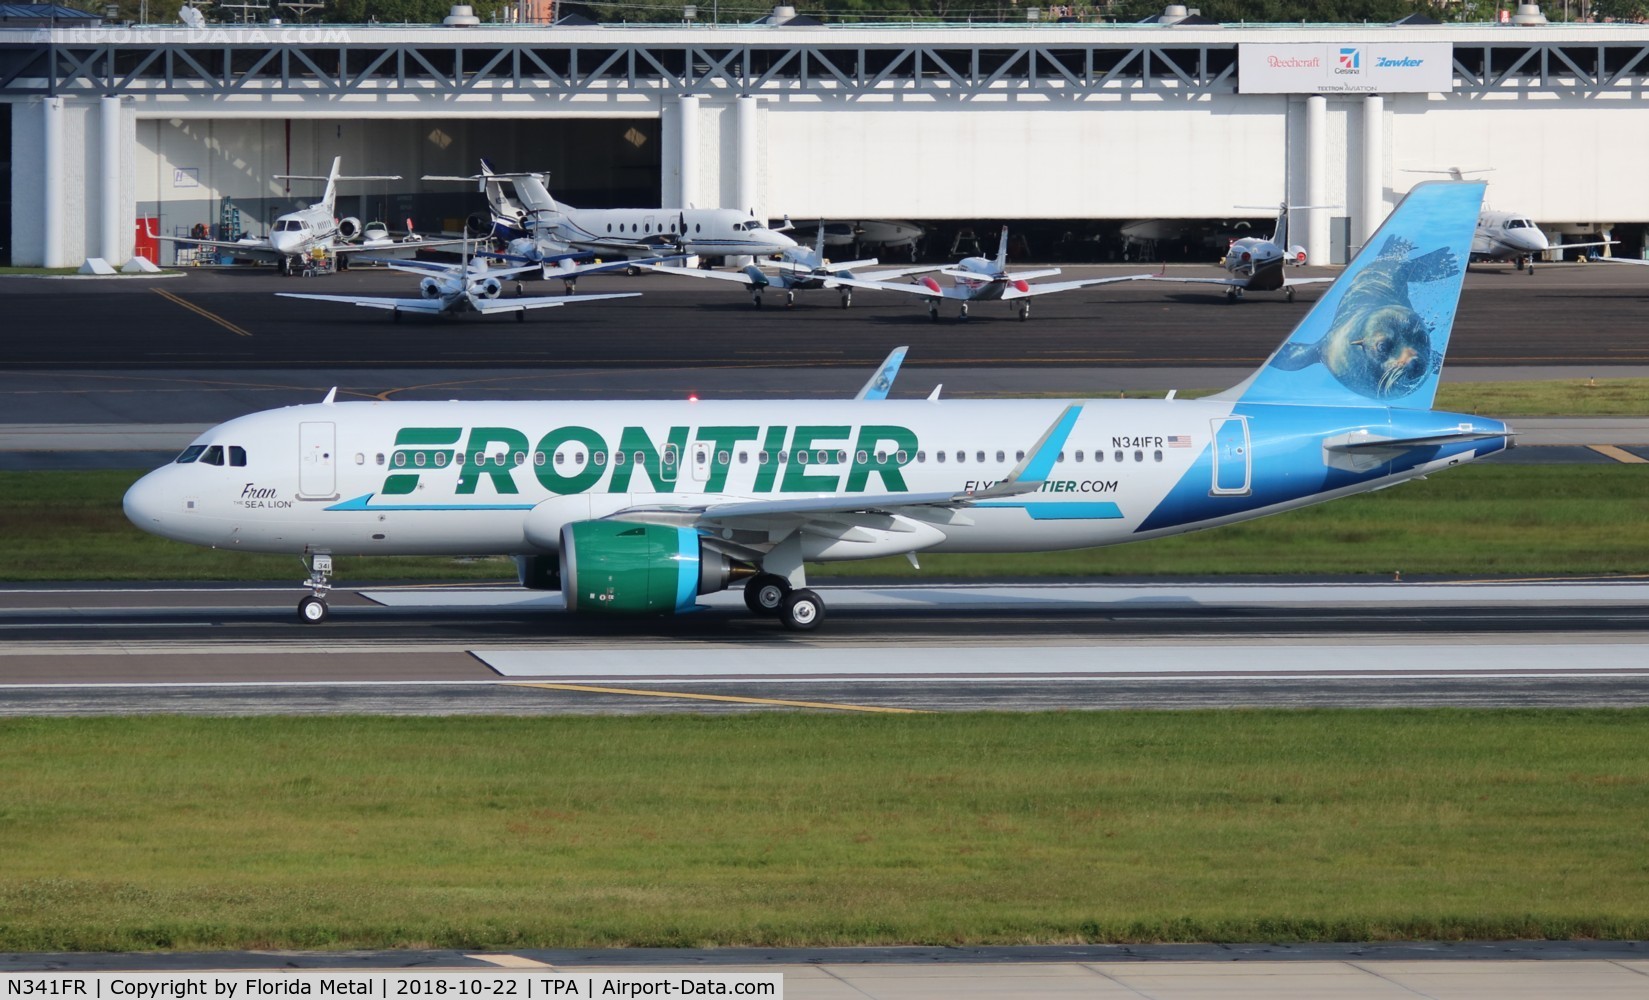 N341FR, 2018 Airbus A320-251NEO C/N 8516, Fran the Sea Lion Frontier